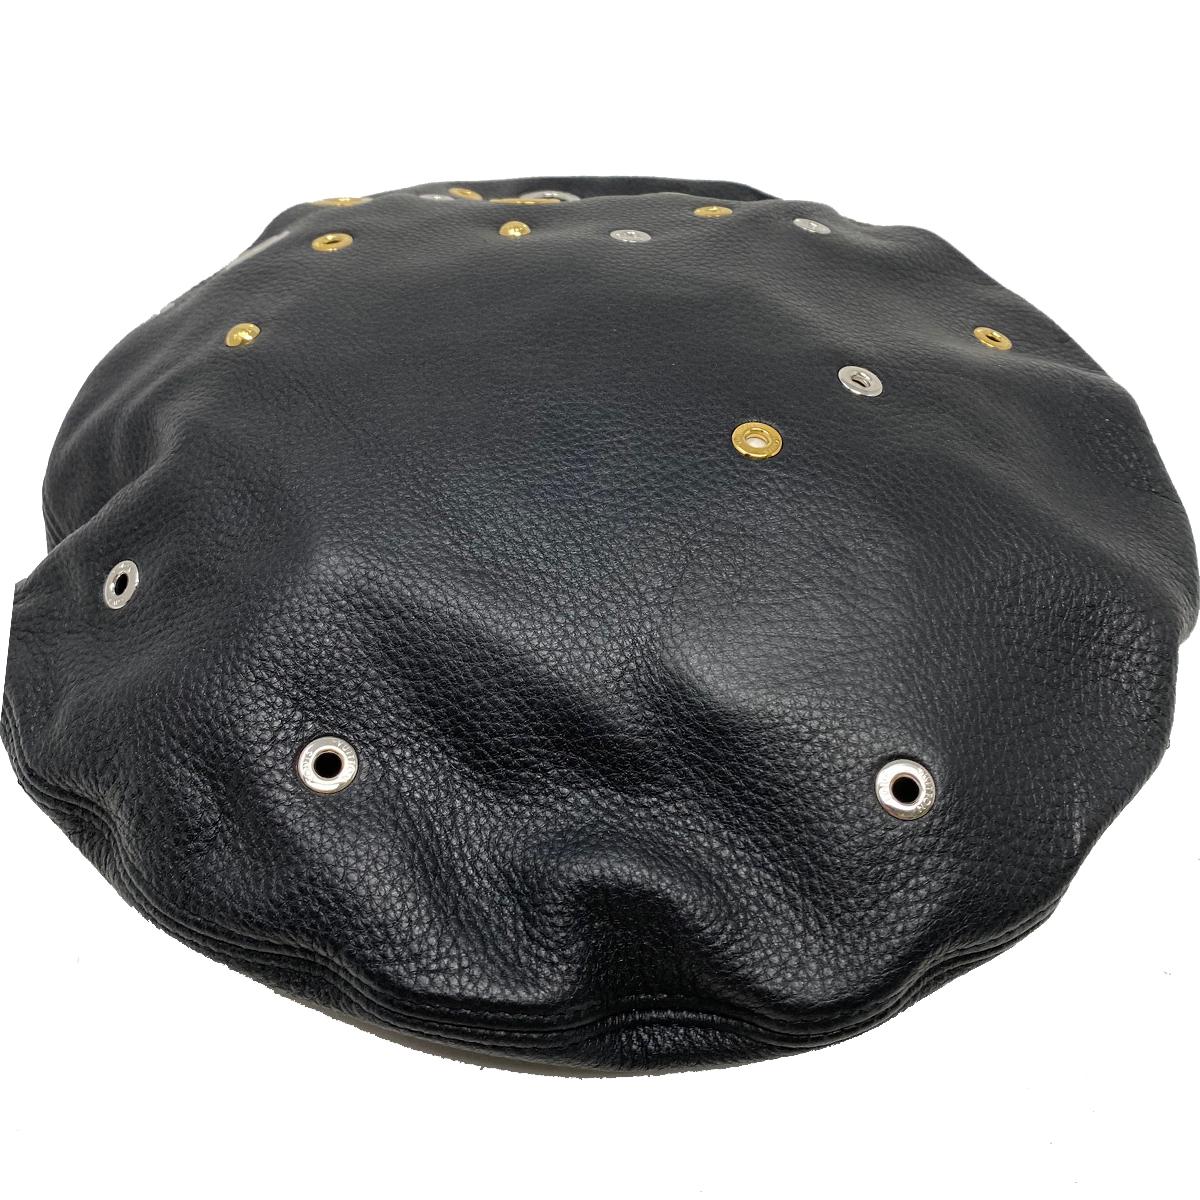 Company-Louis Vuitton
Model-Embellished Grommets Black Leather Beret Hat With Box 
Color-Black 
Date Code-N/A
Material-Leather
Measurements-33.5 